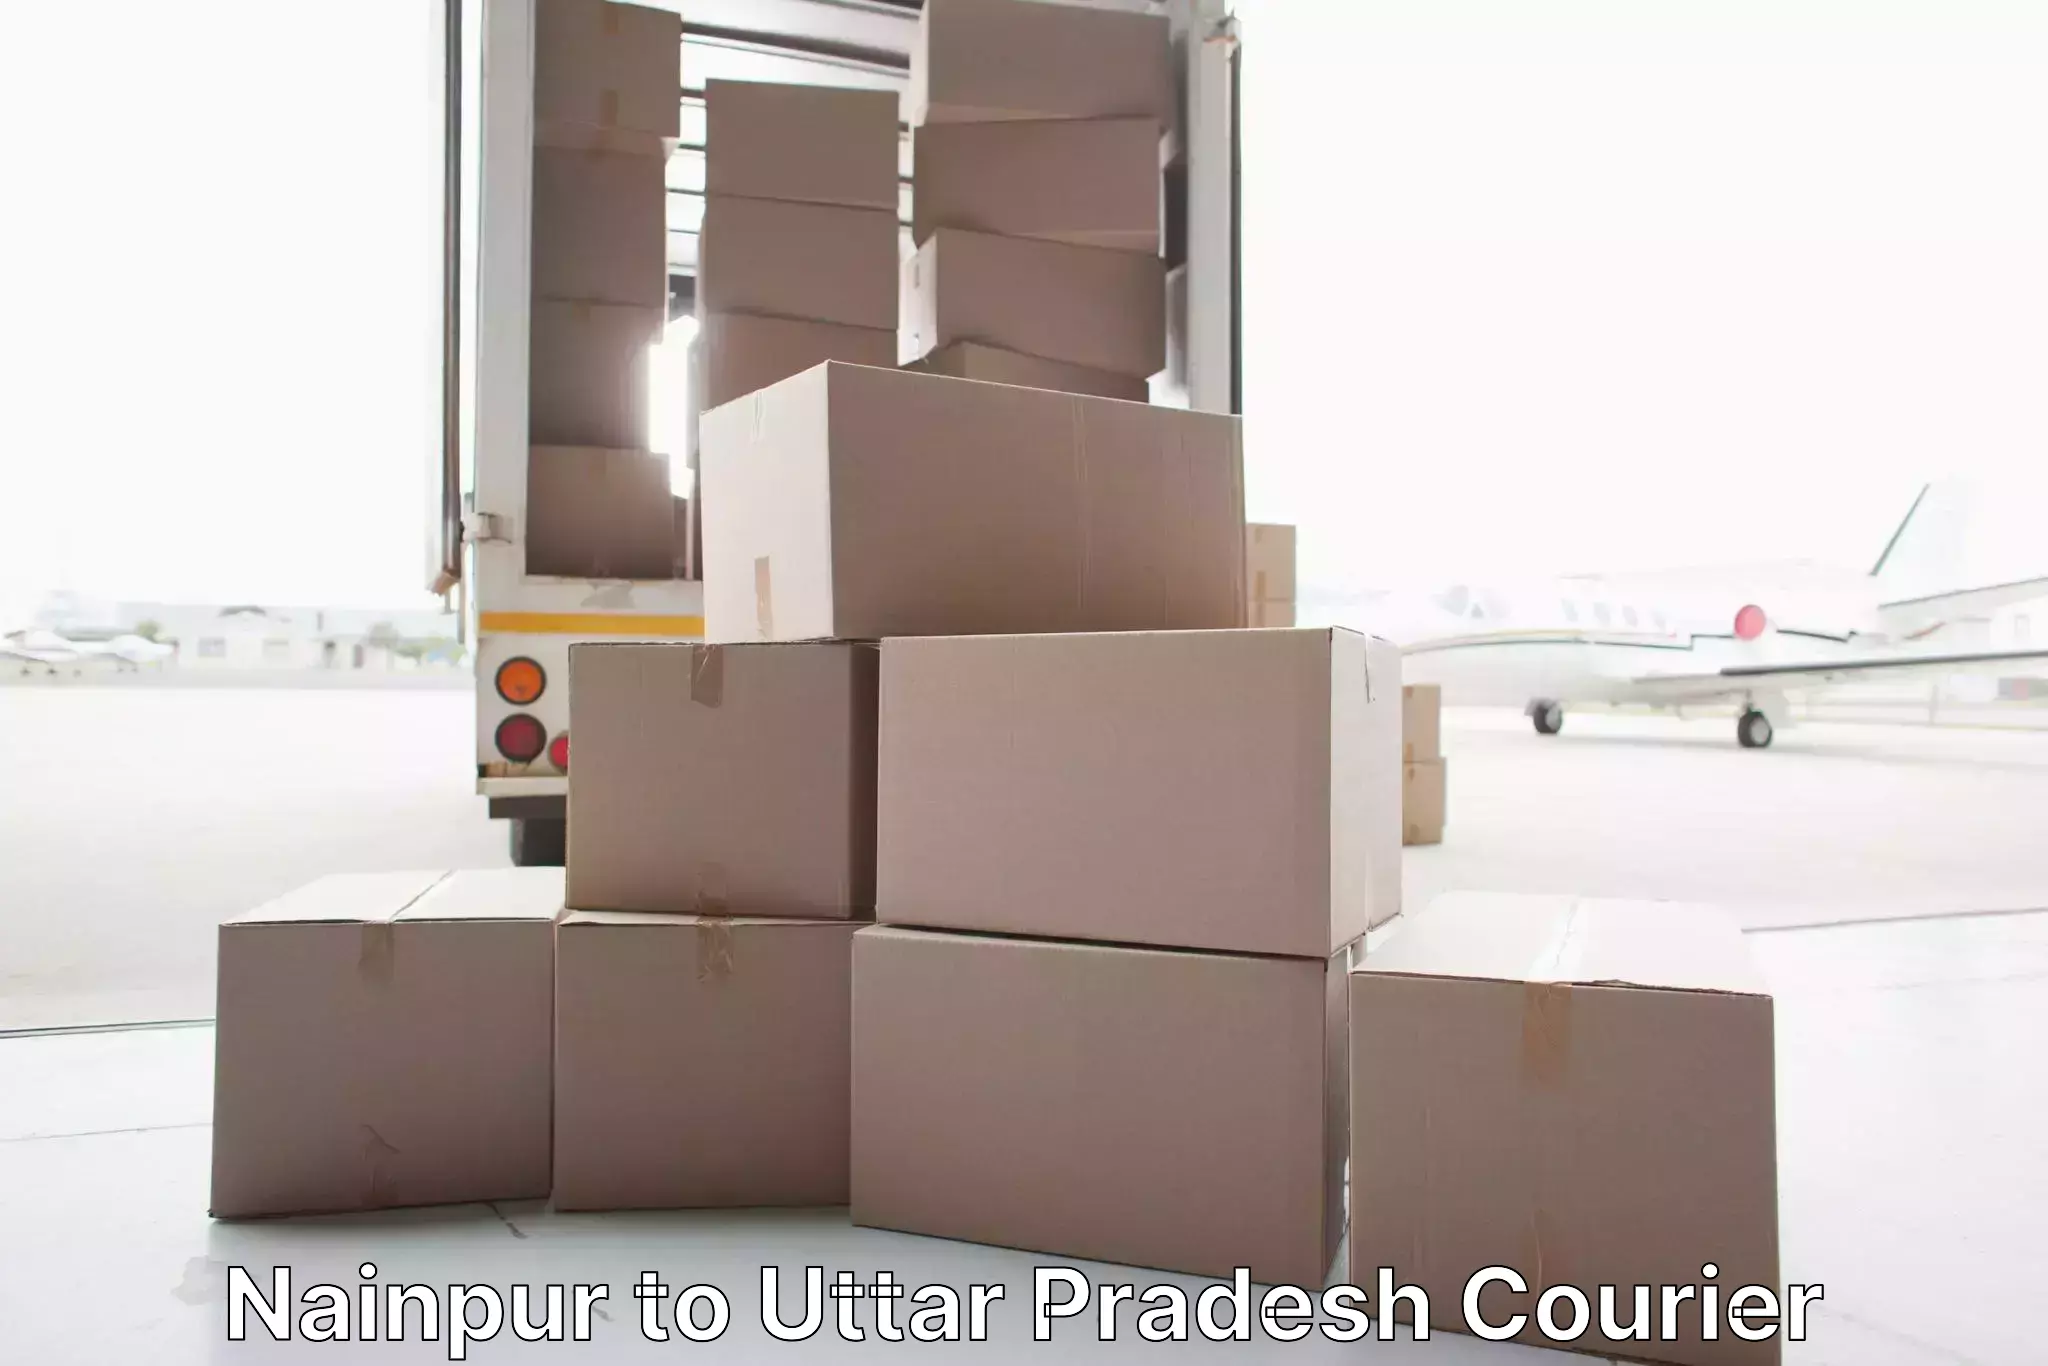 Furniture transport specialists Nainpur to Khalilabad